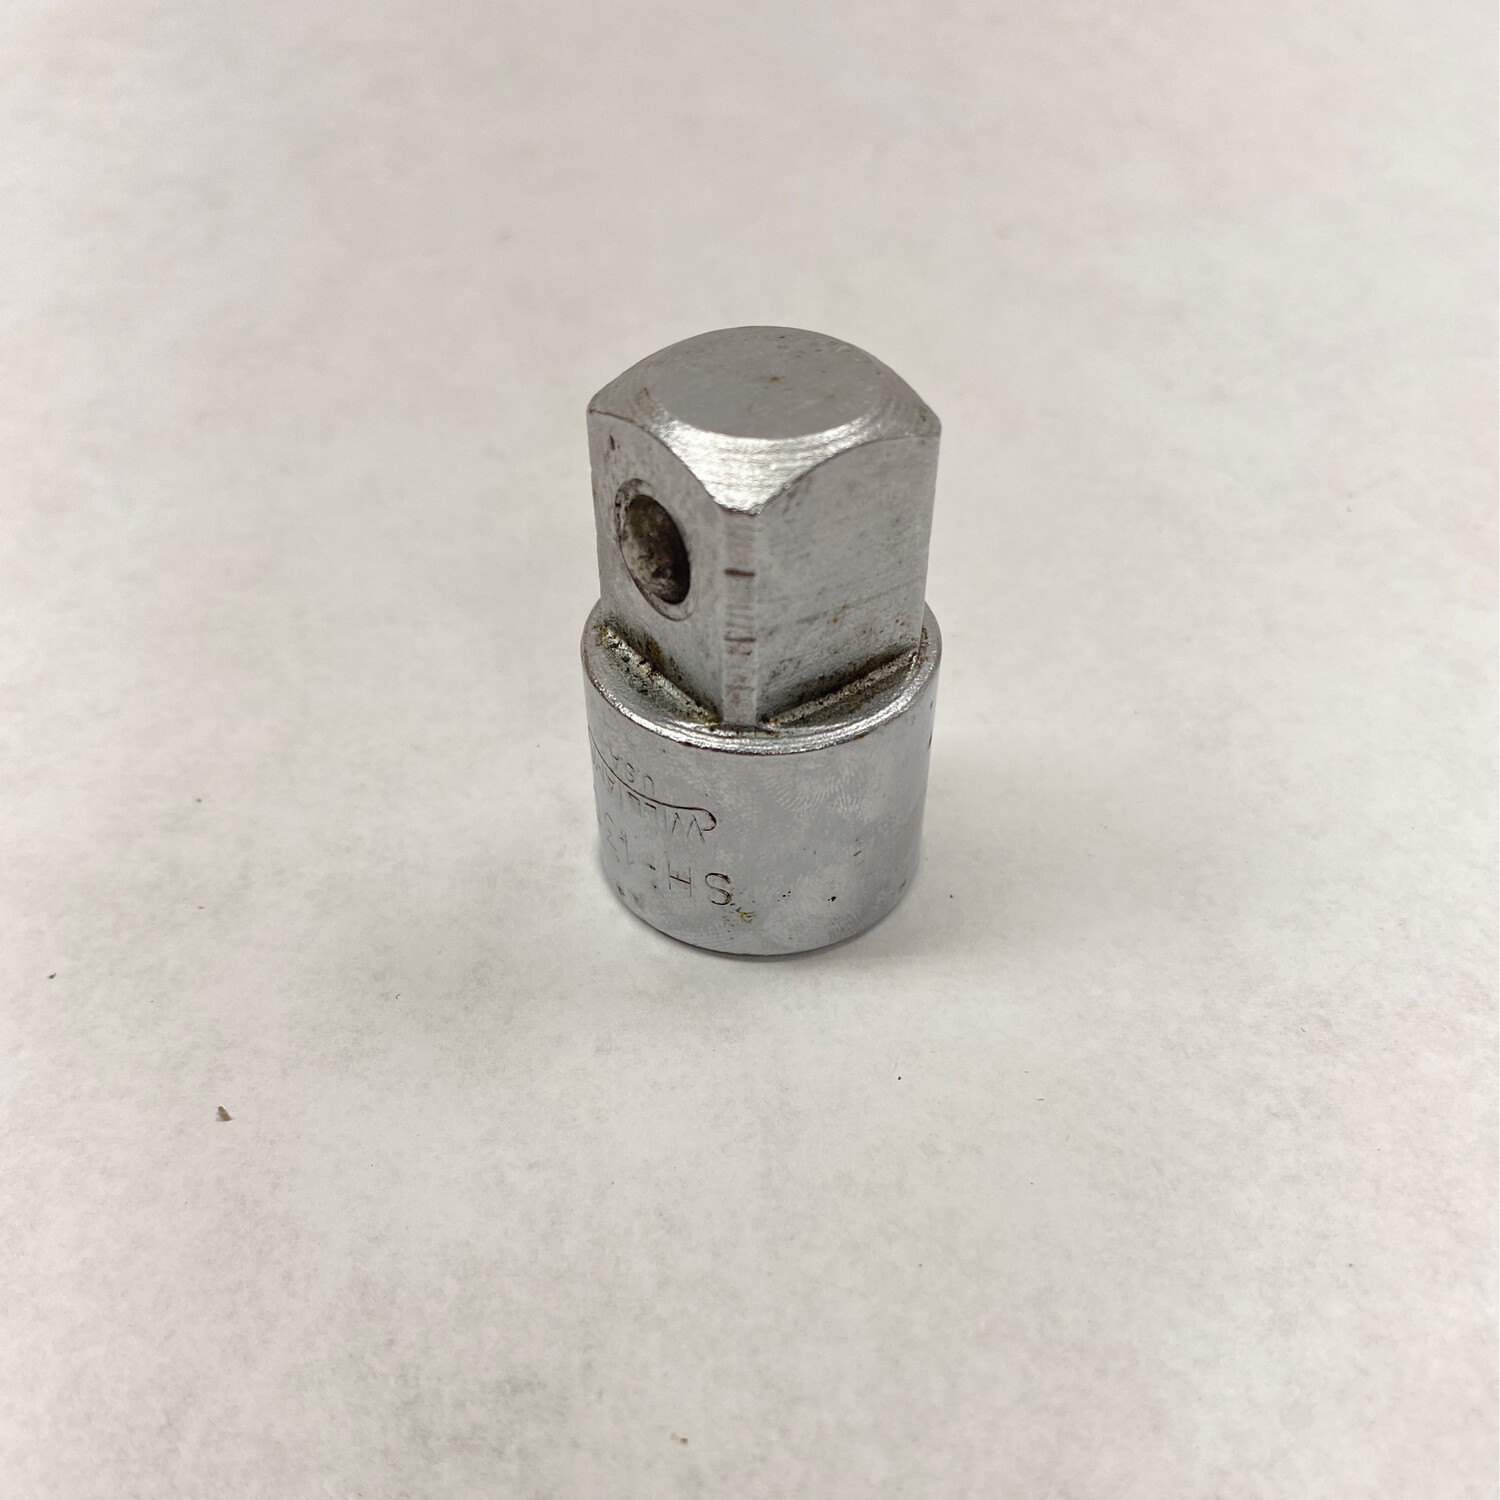 Williams 1/2” To 3/4” Drive Male Socket Adapter, SH-130